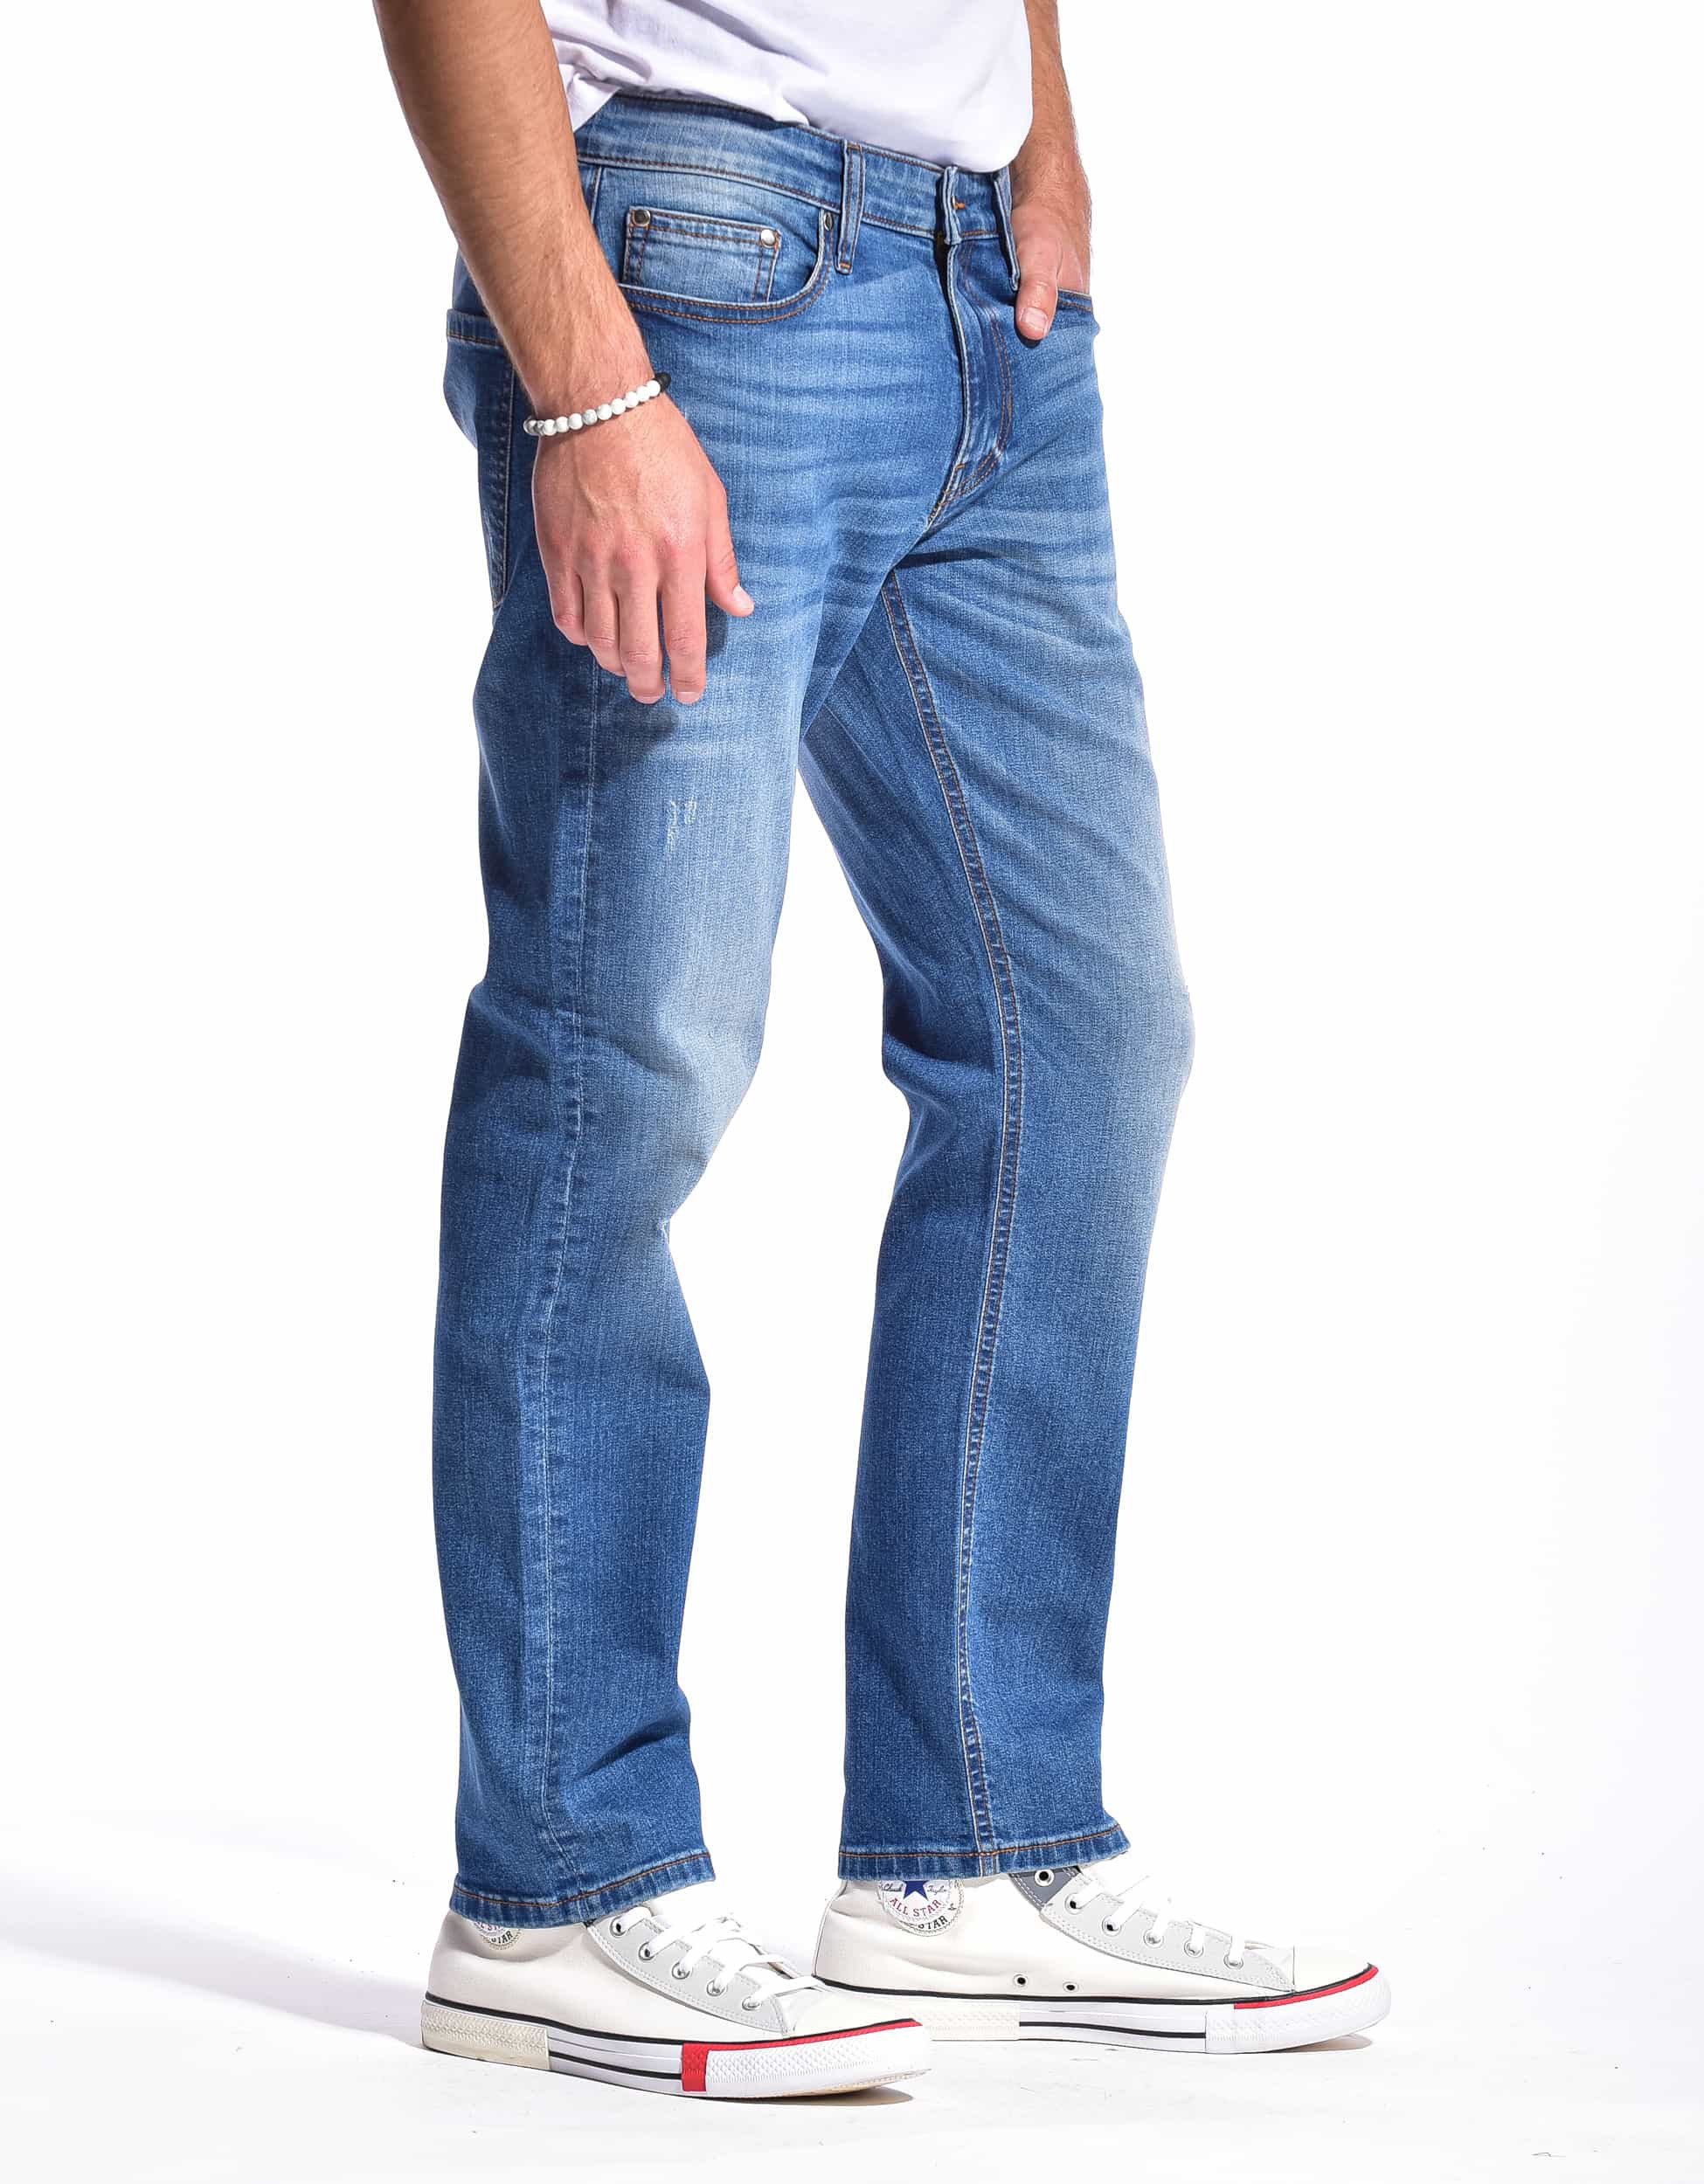 DEPARTED MEN'S PARK AVENUE STRAIGHT JEANS - image 4 of 11